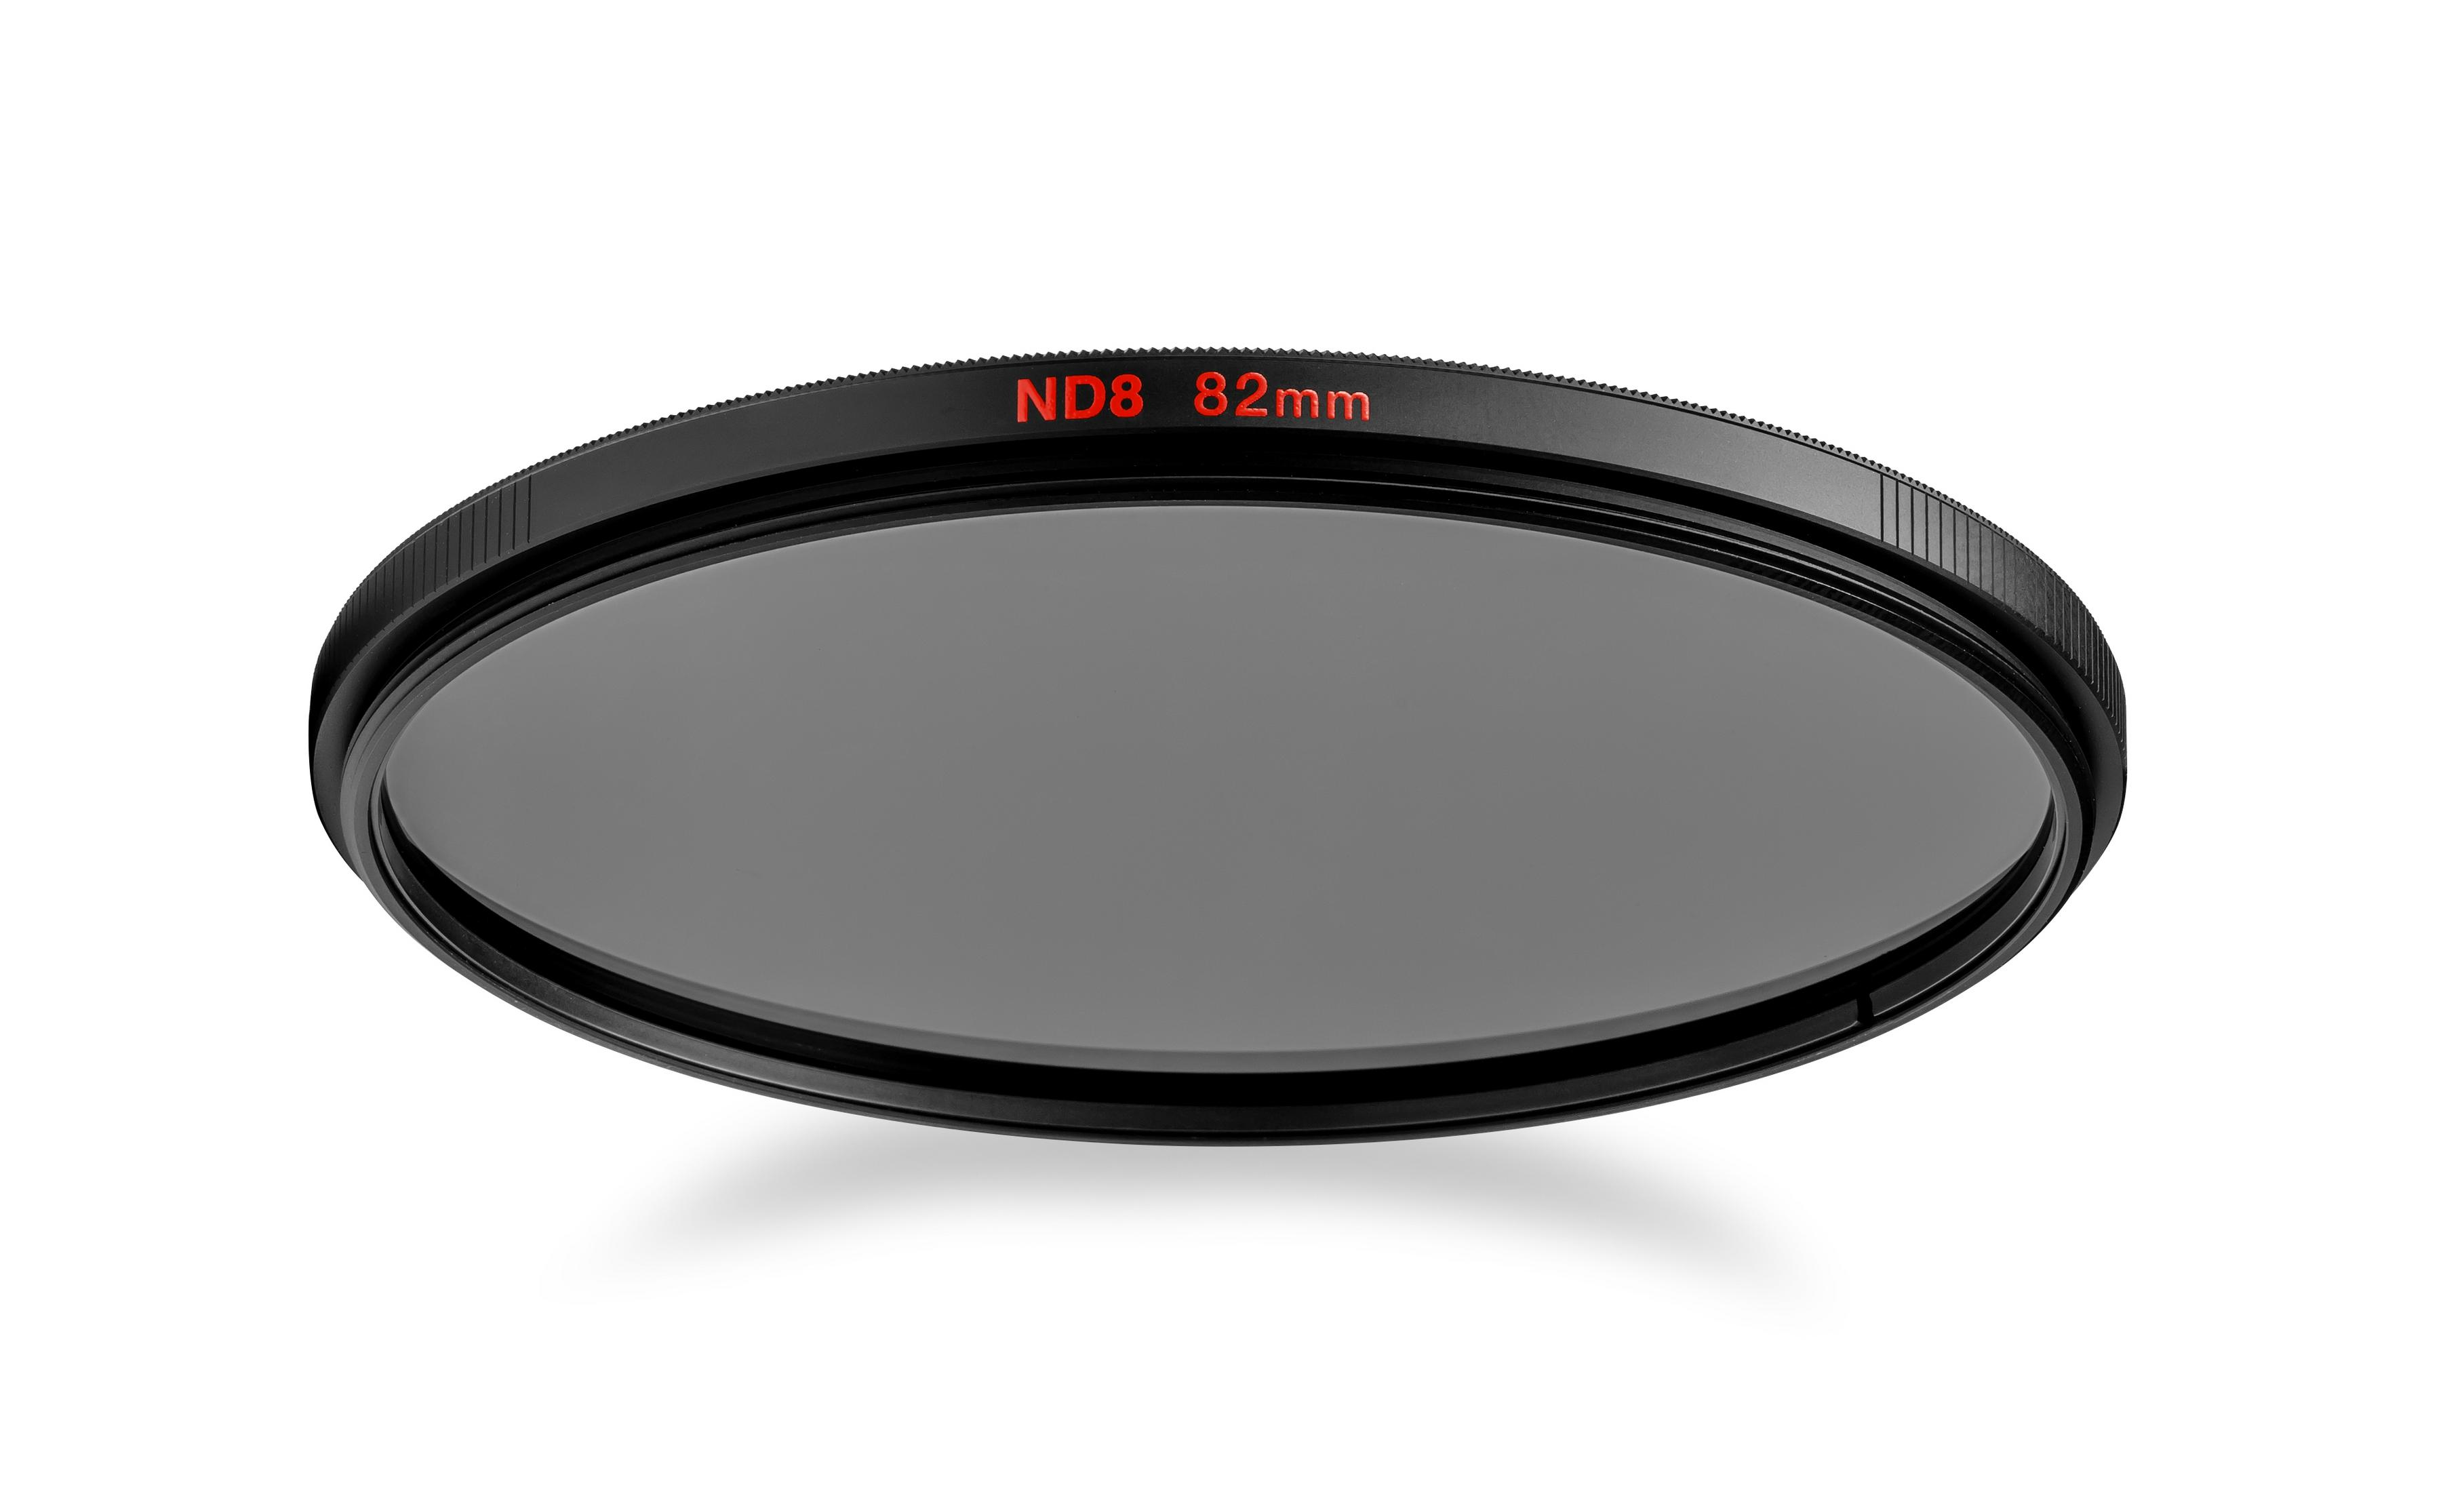 Pol-Filter MFND8-55 RUNDFILTER mm 55 55MM MANFROTTO